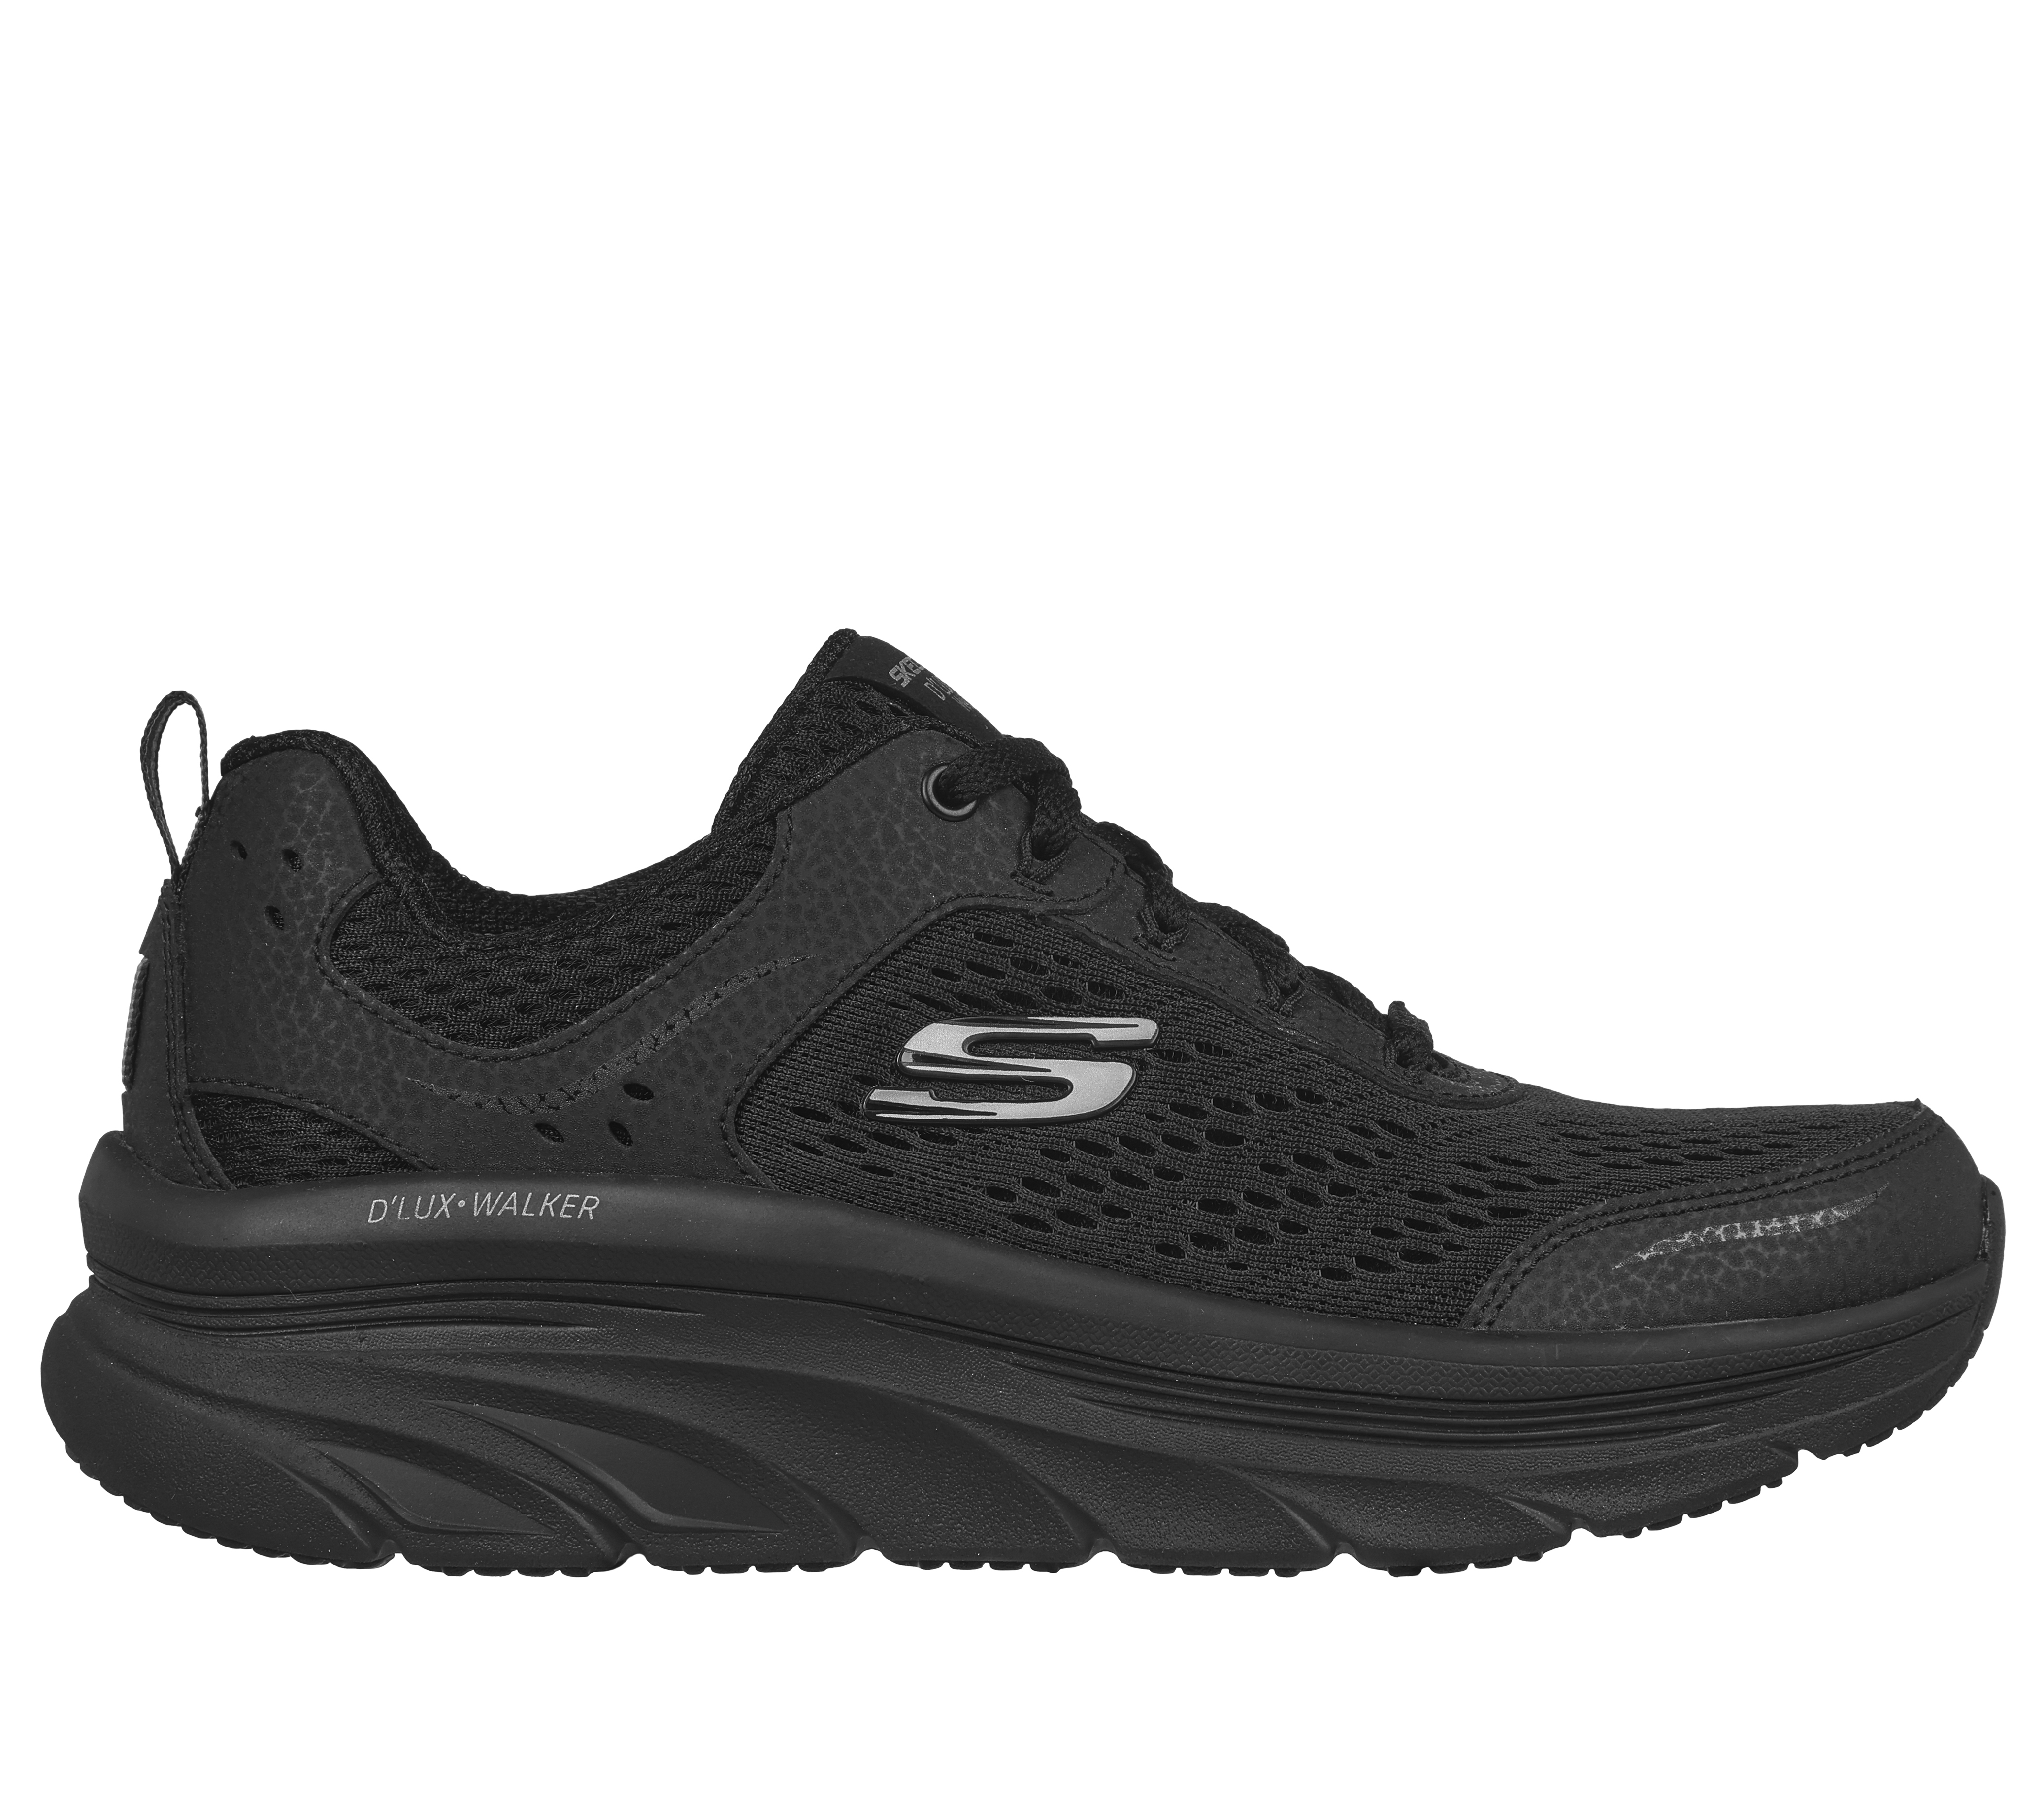 Tranquility Dalset mm Relaxed Fit: D'Lux Walker - Infinite Motion | SKECHERS